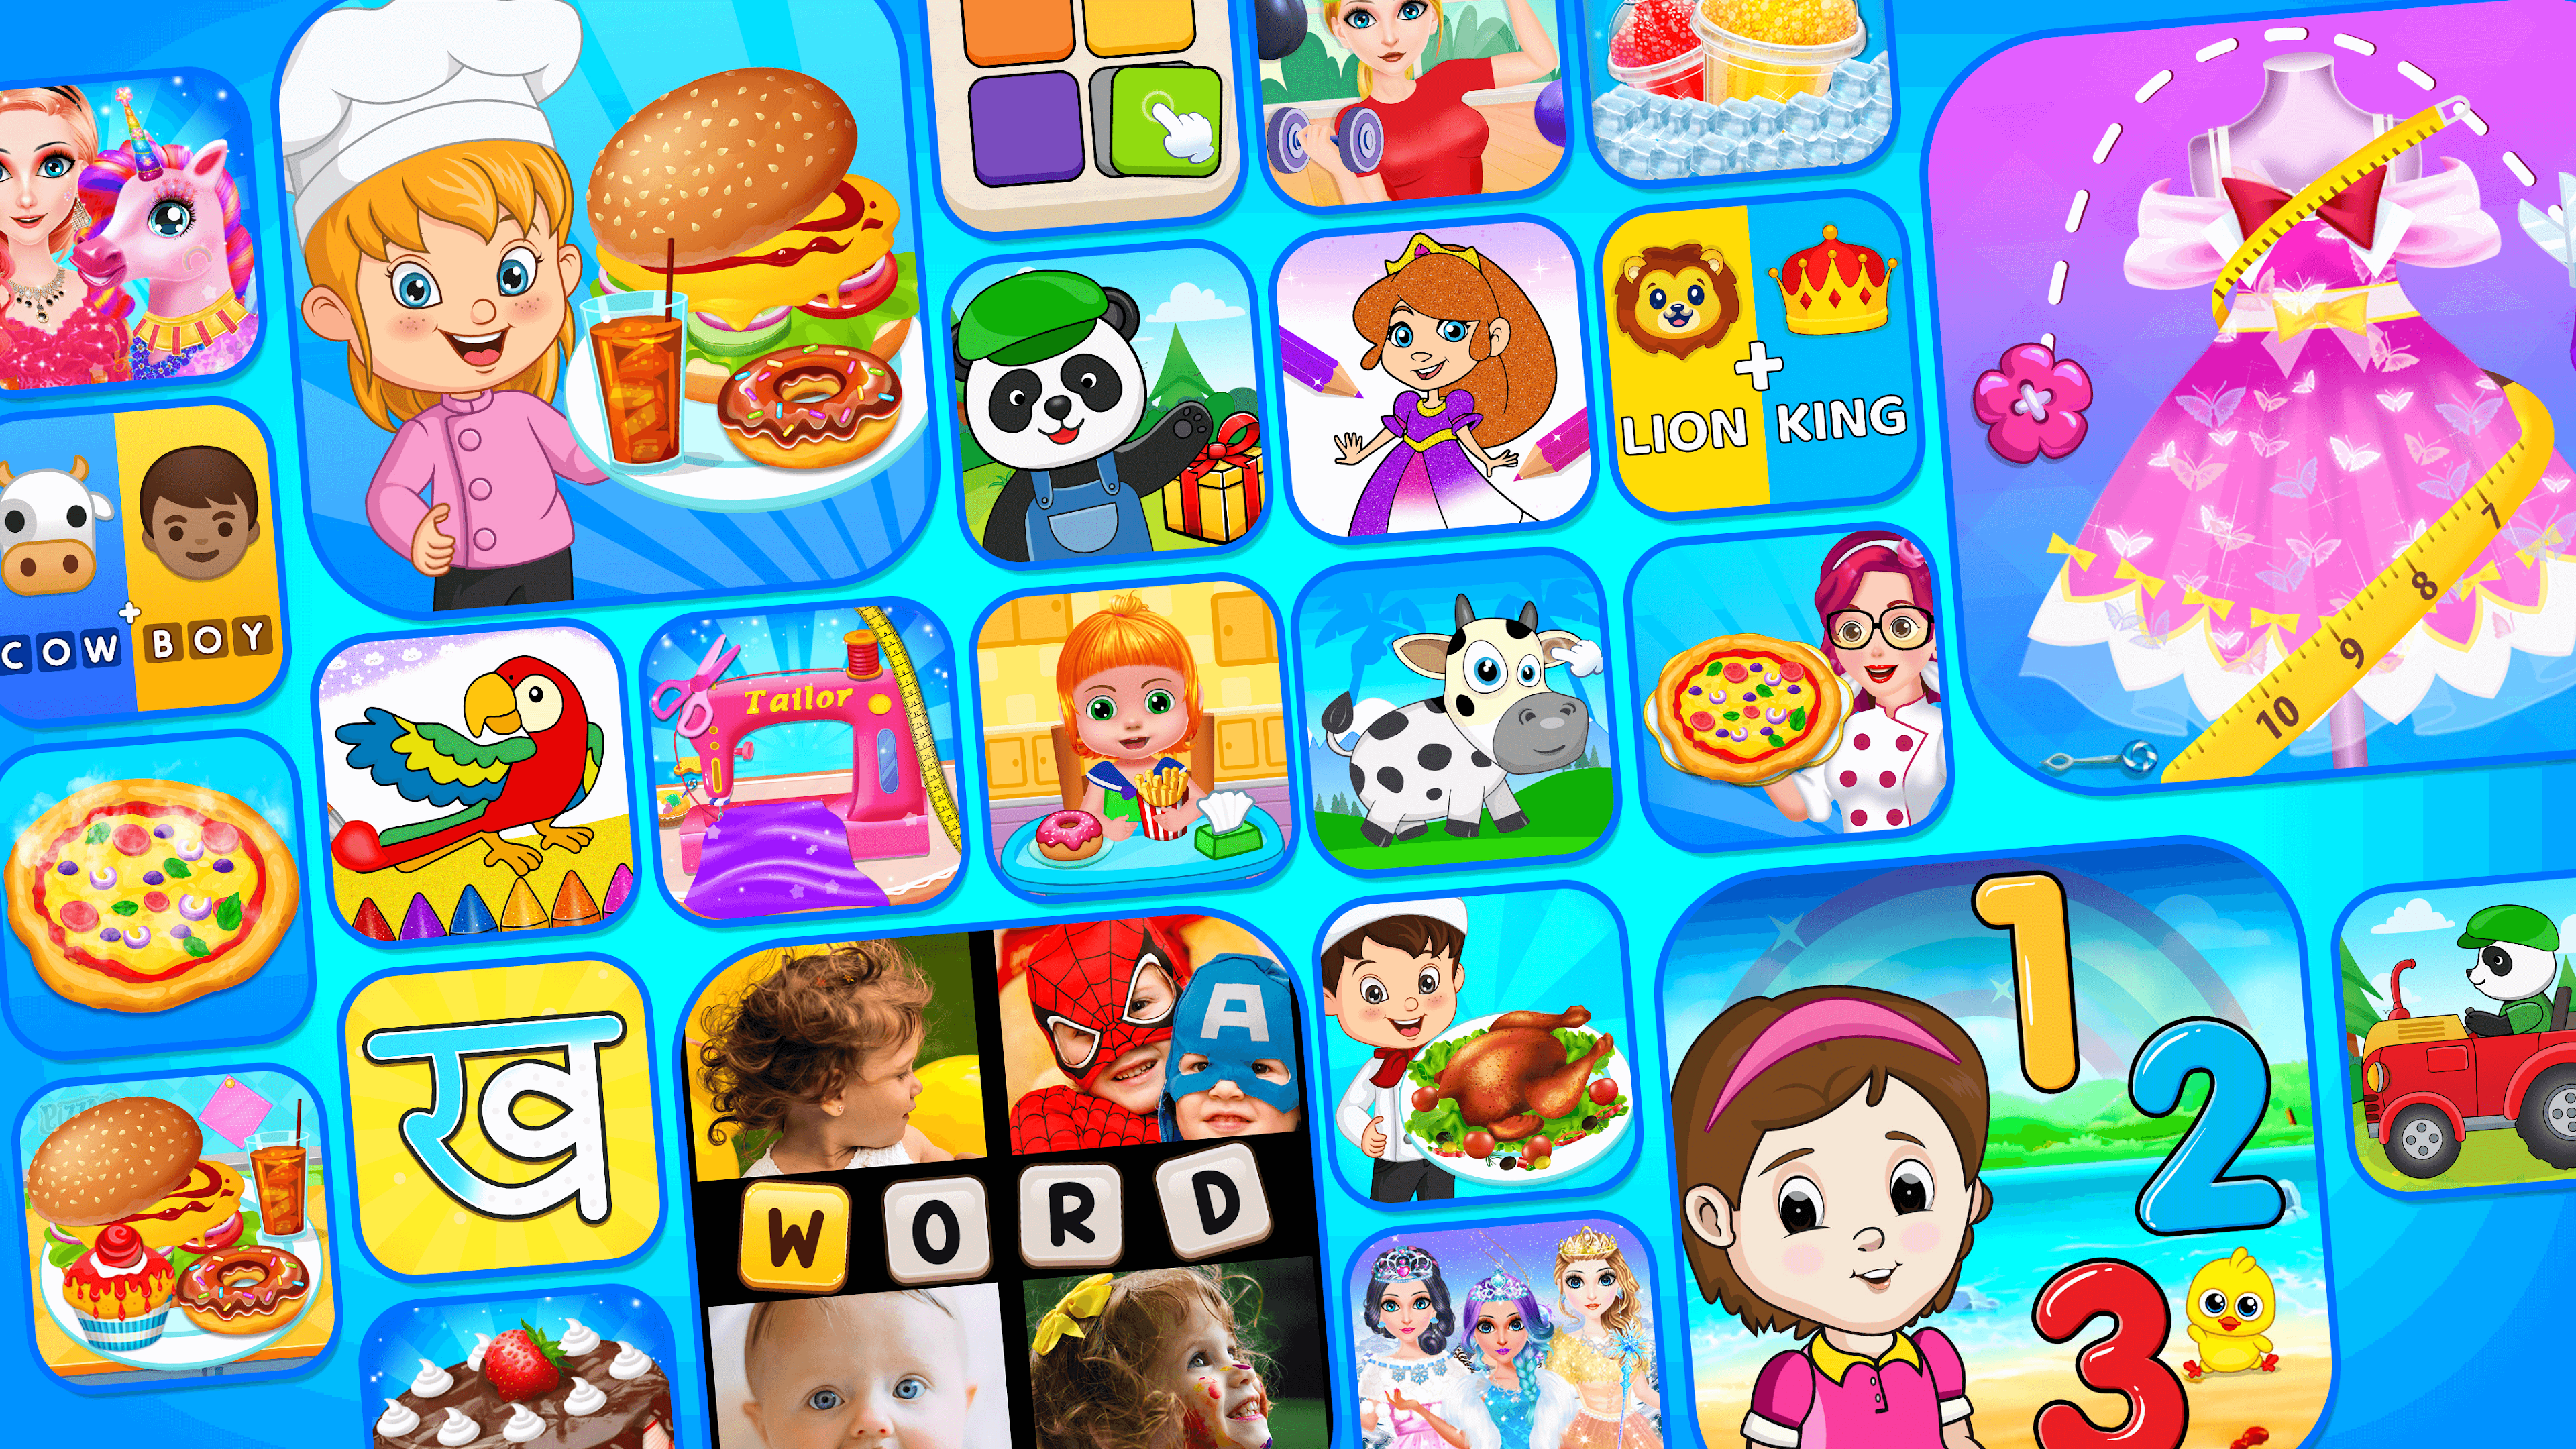 Apps Android no Google Play: Z & K Games